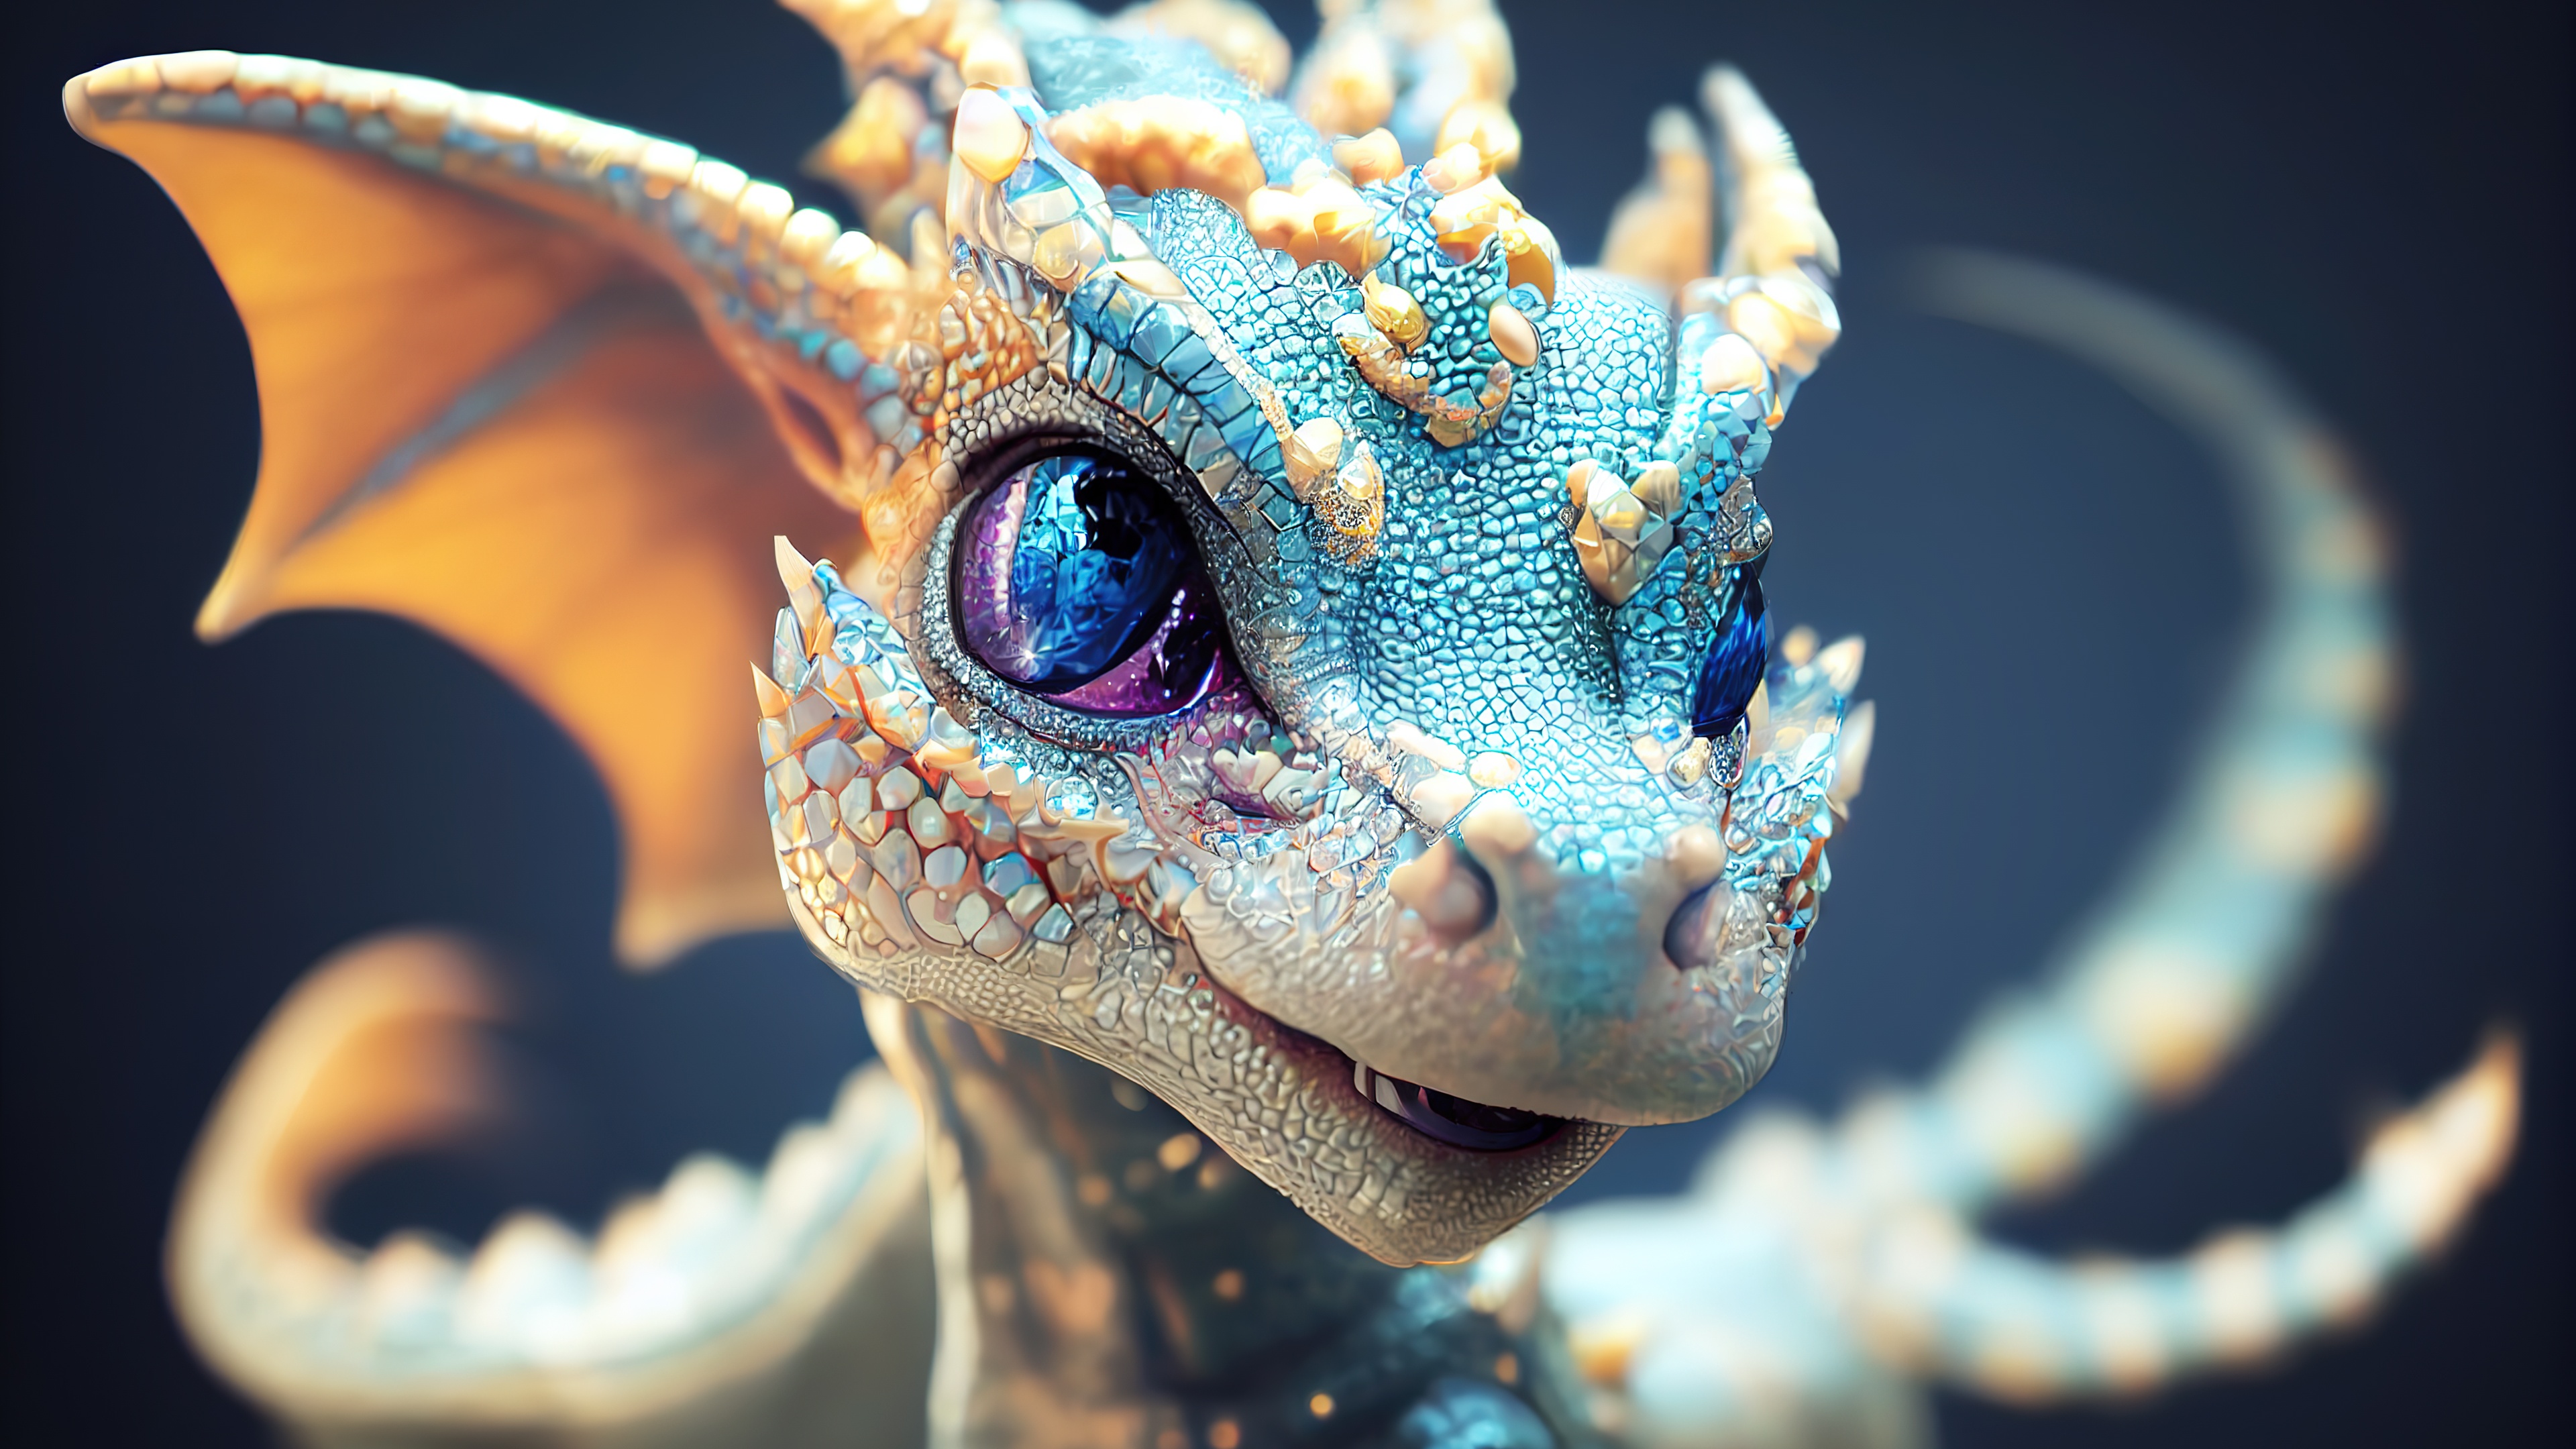 Cool Dragons Wallpaper 62 images